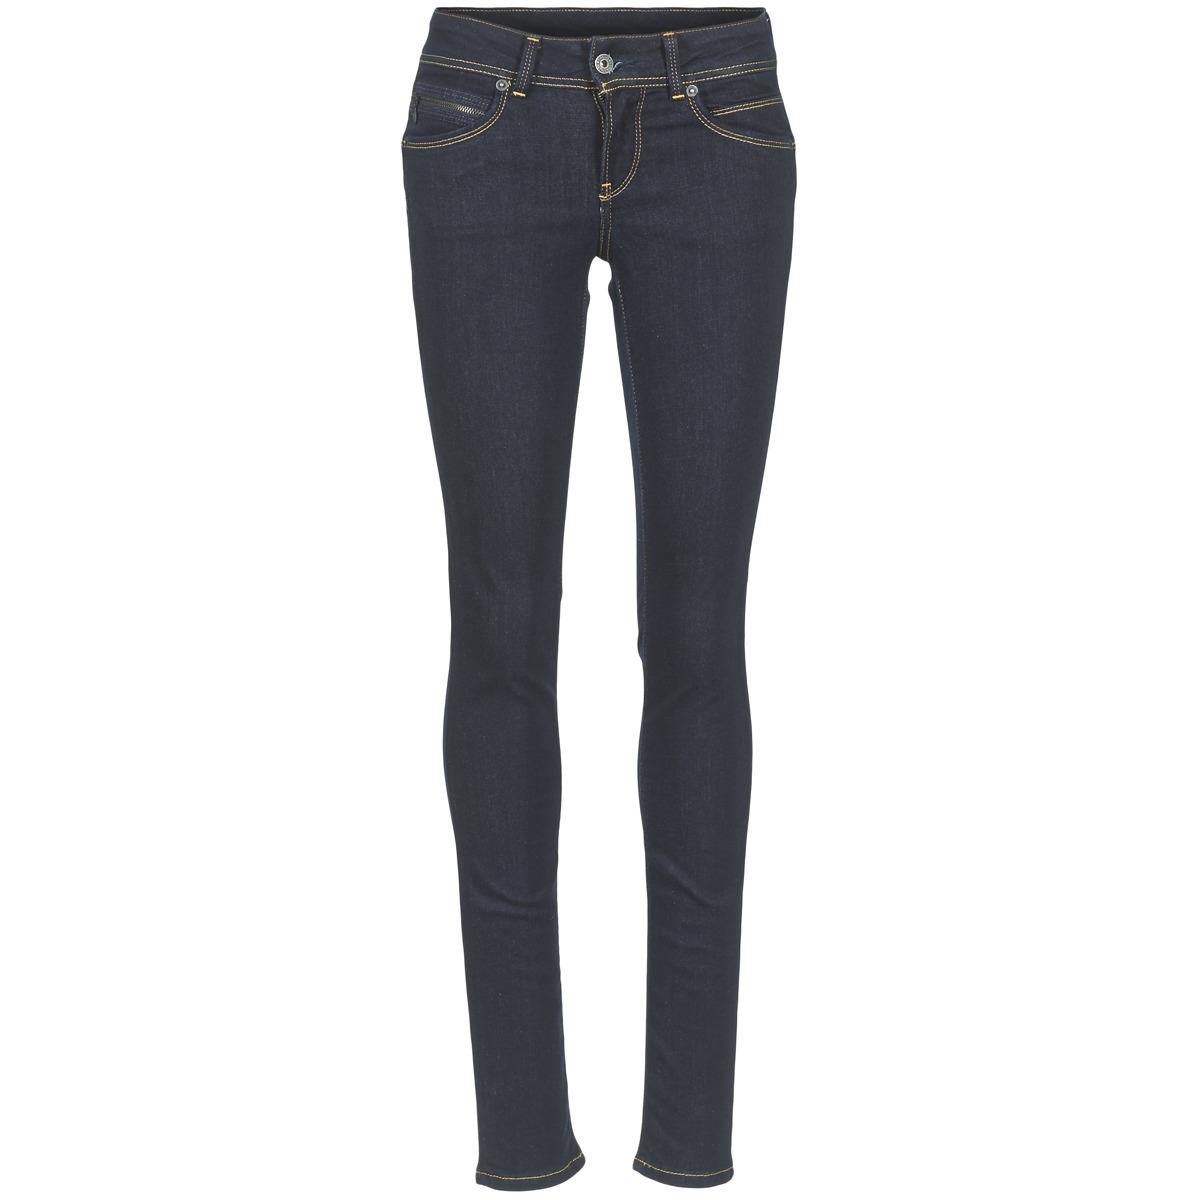 Pepe Jeans Denim New Brooke Skinny Jeans in Blue - Save 42% - Lyst